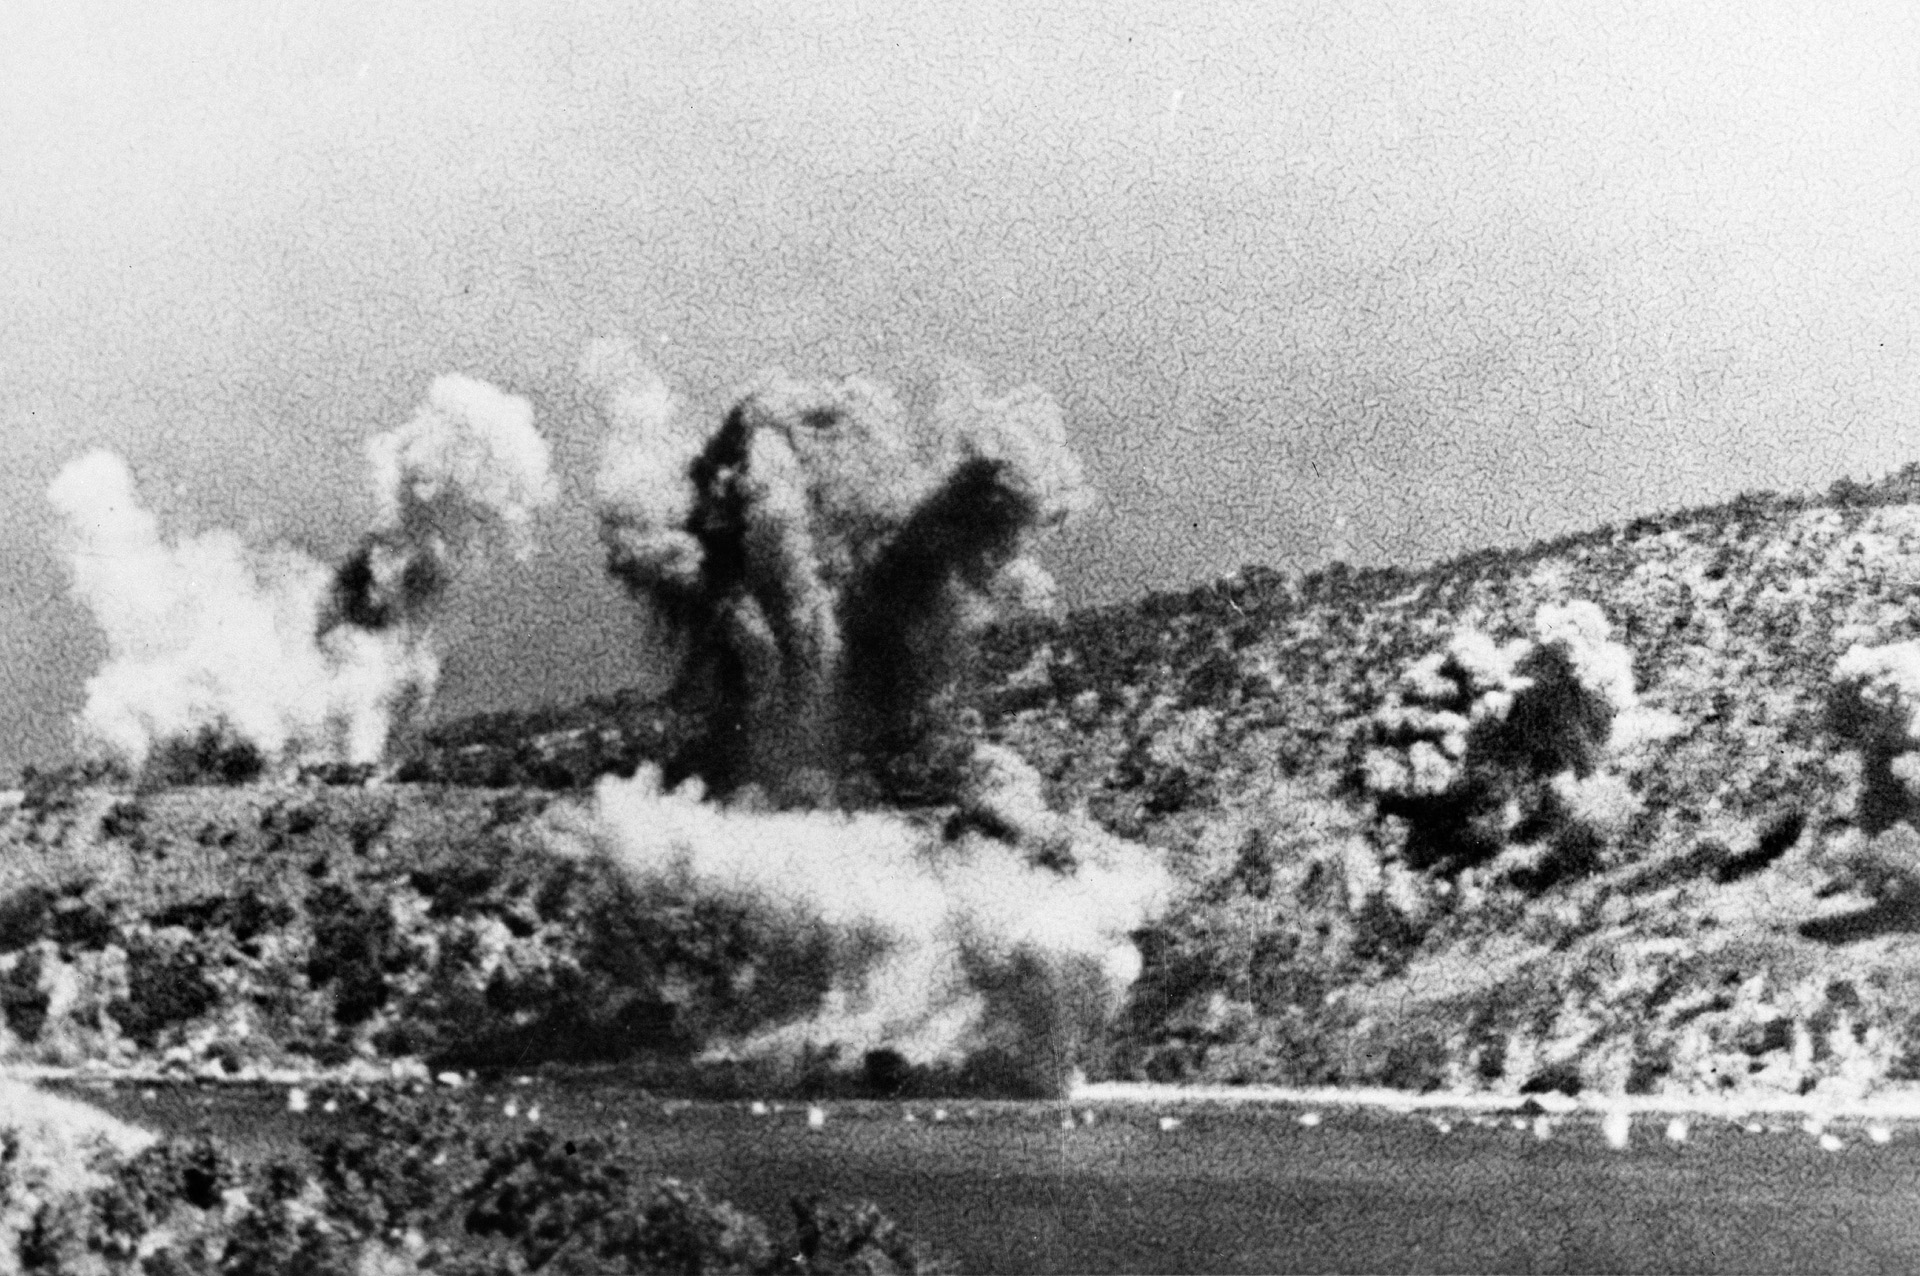 Pillars of smoke rise from the hills and harbor as Japanese aircraft carry out an air raid on Allied shipping targets in Milne Bay.